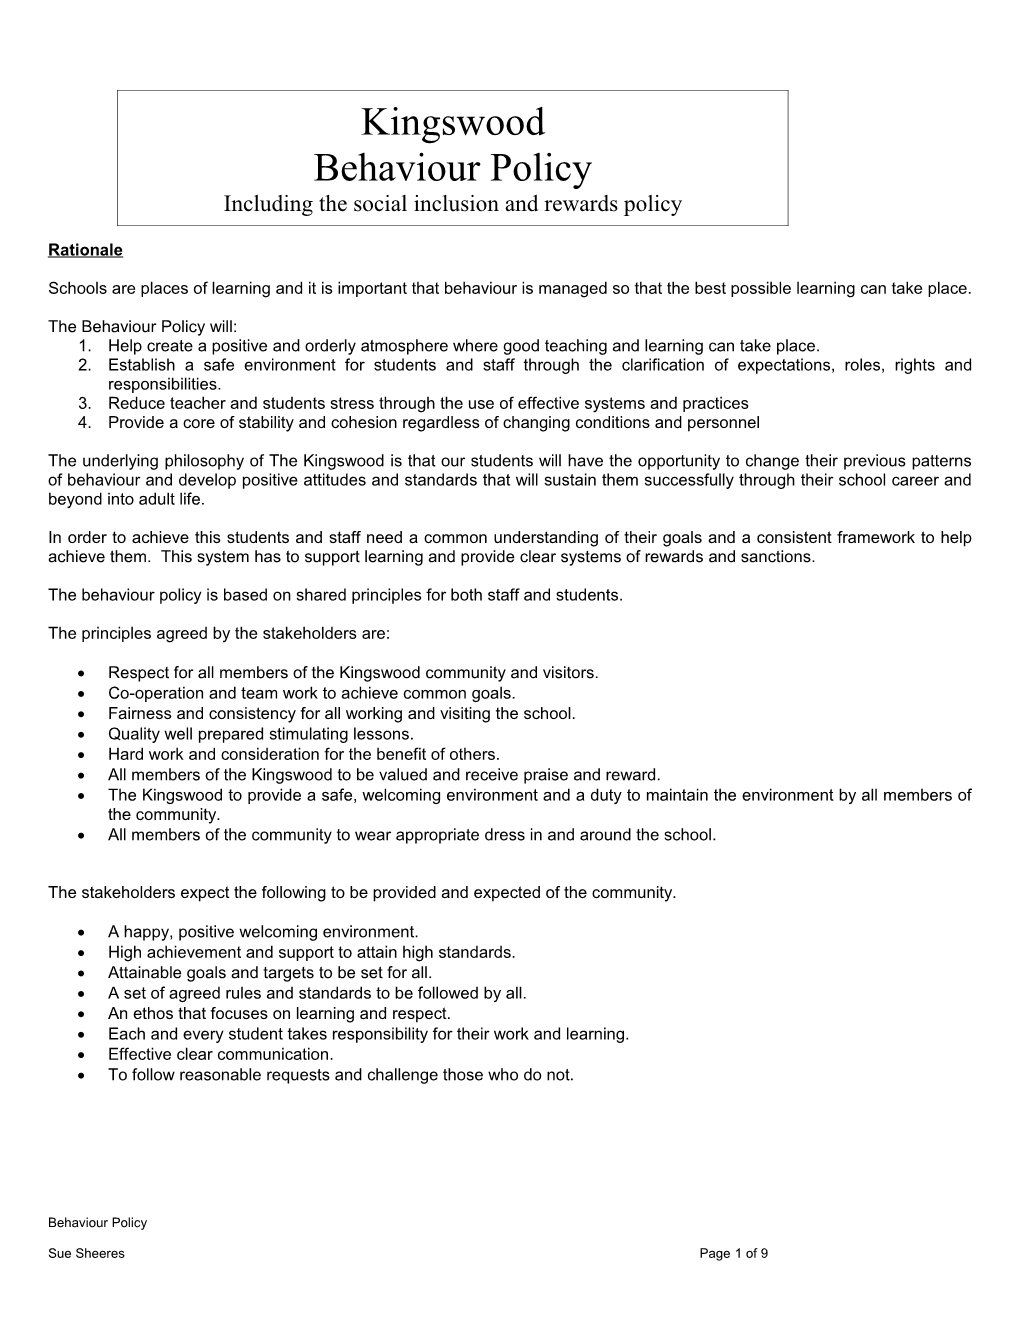 The Behaviour Policy Will